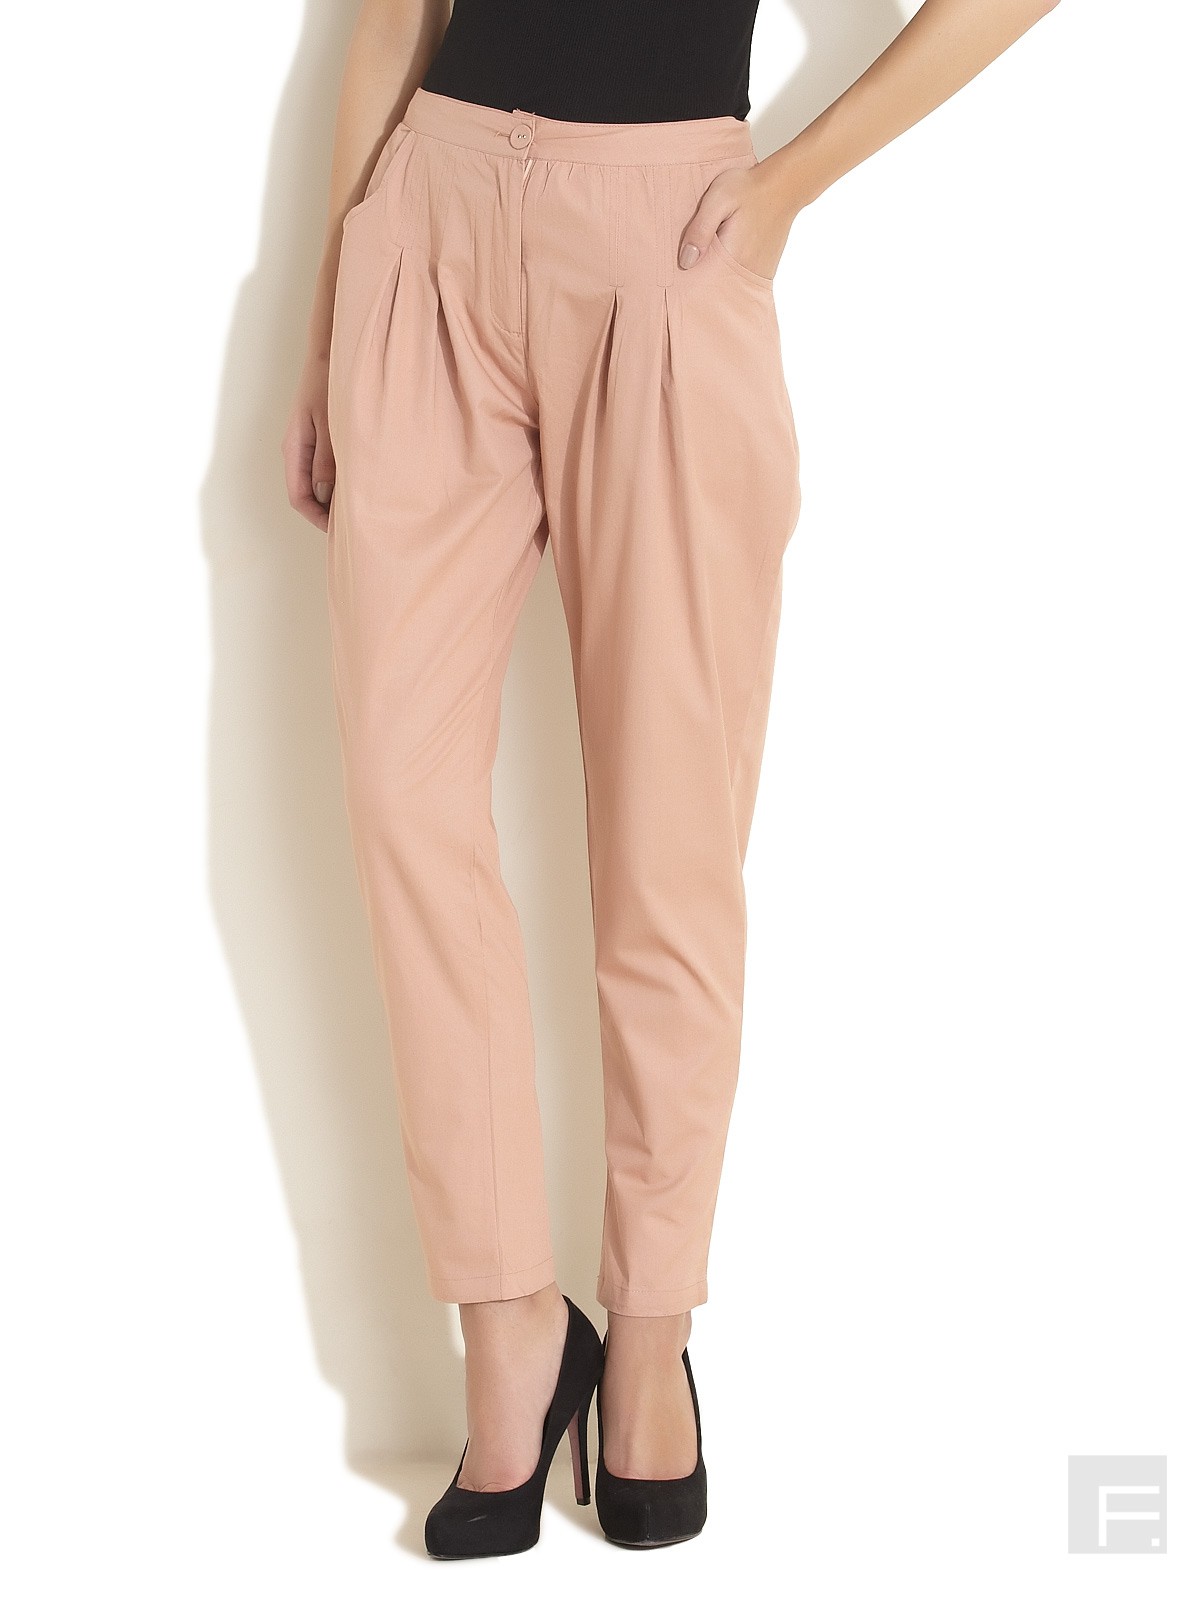 Trousers For Women: must For Each Wardrobe – thefashiontamer.com